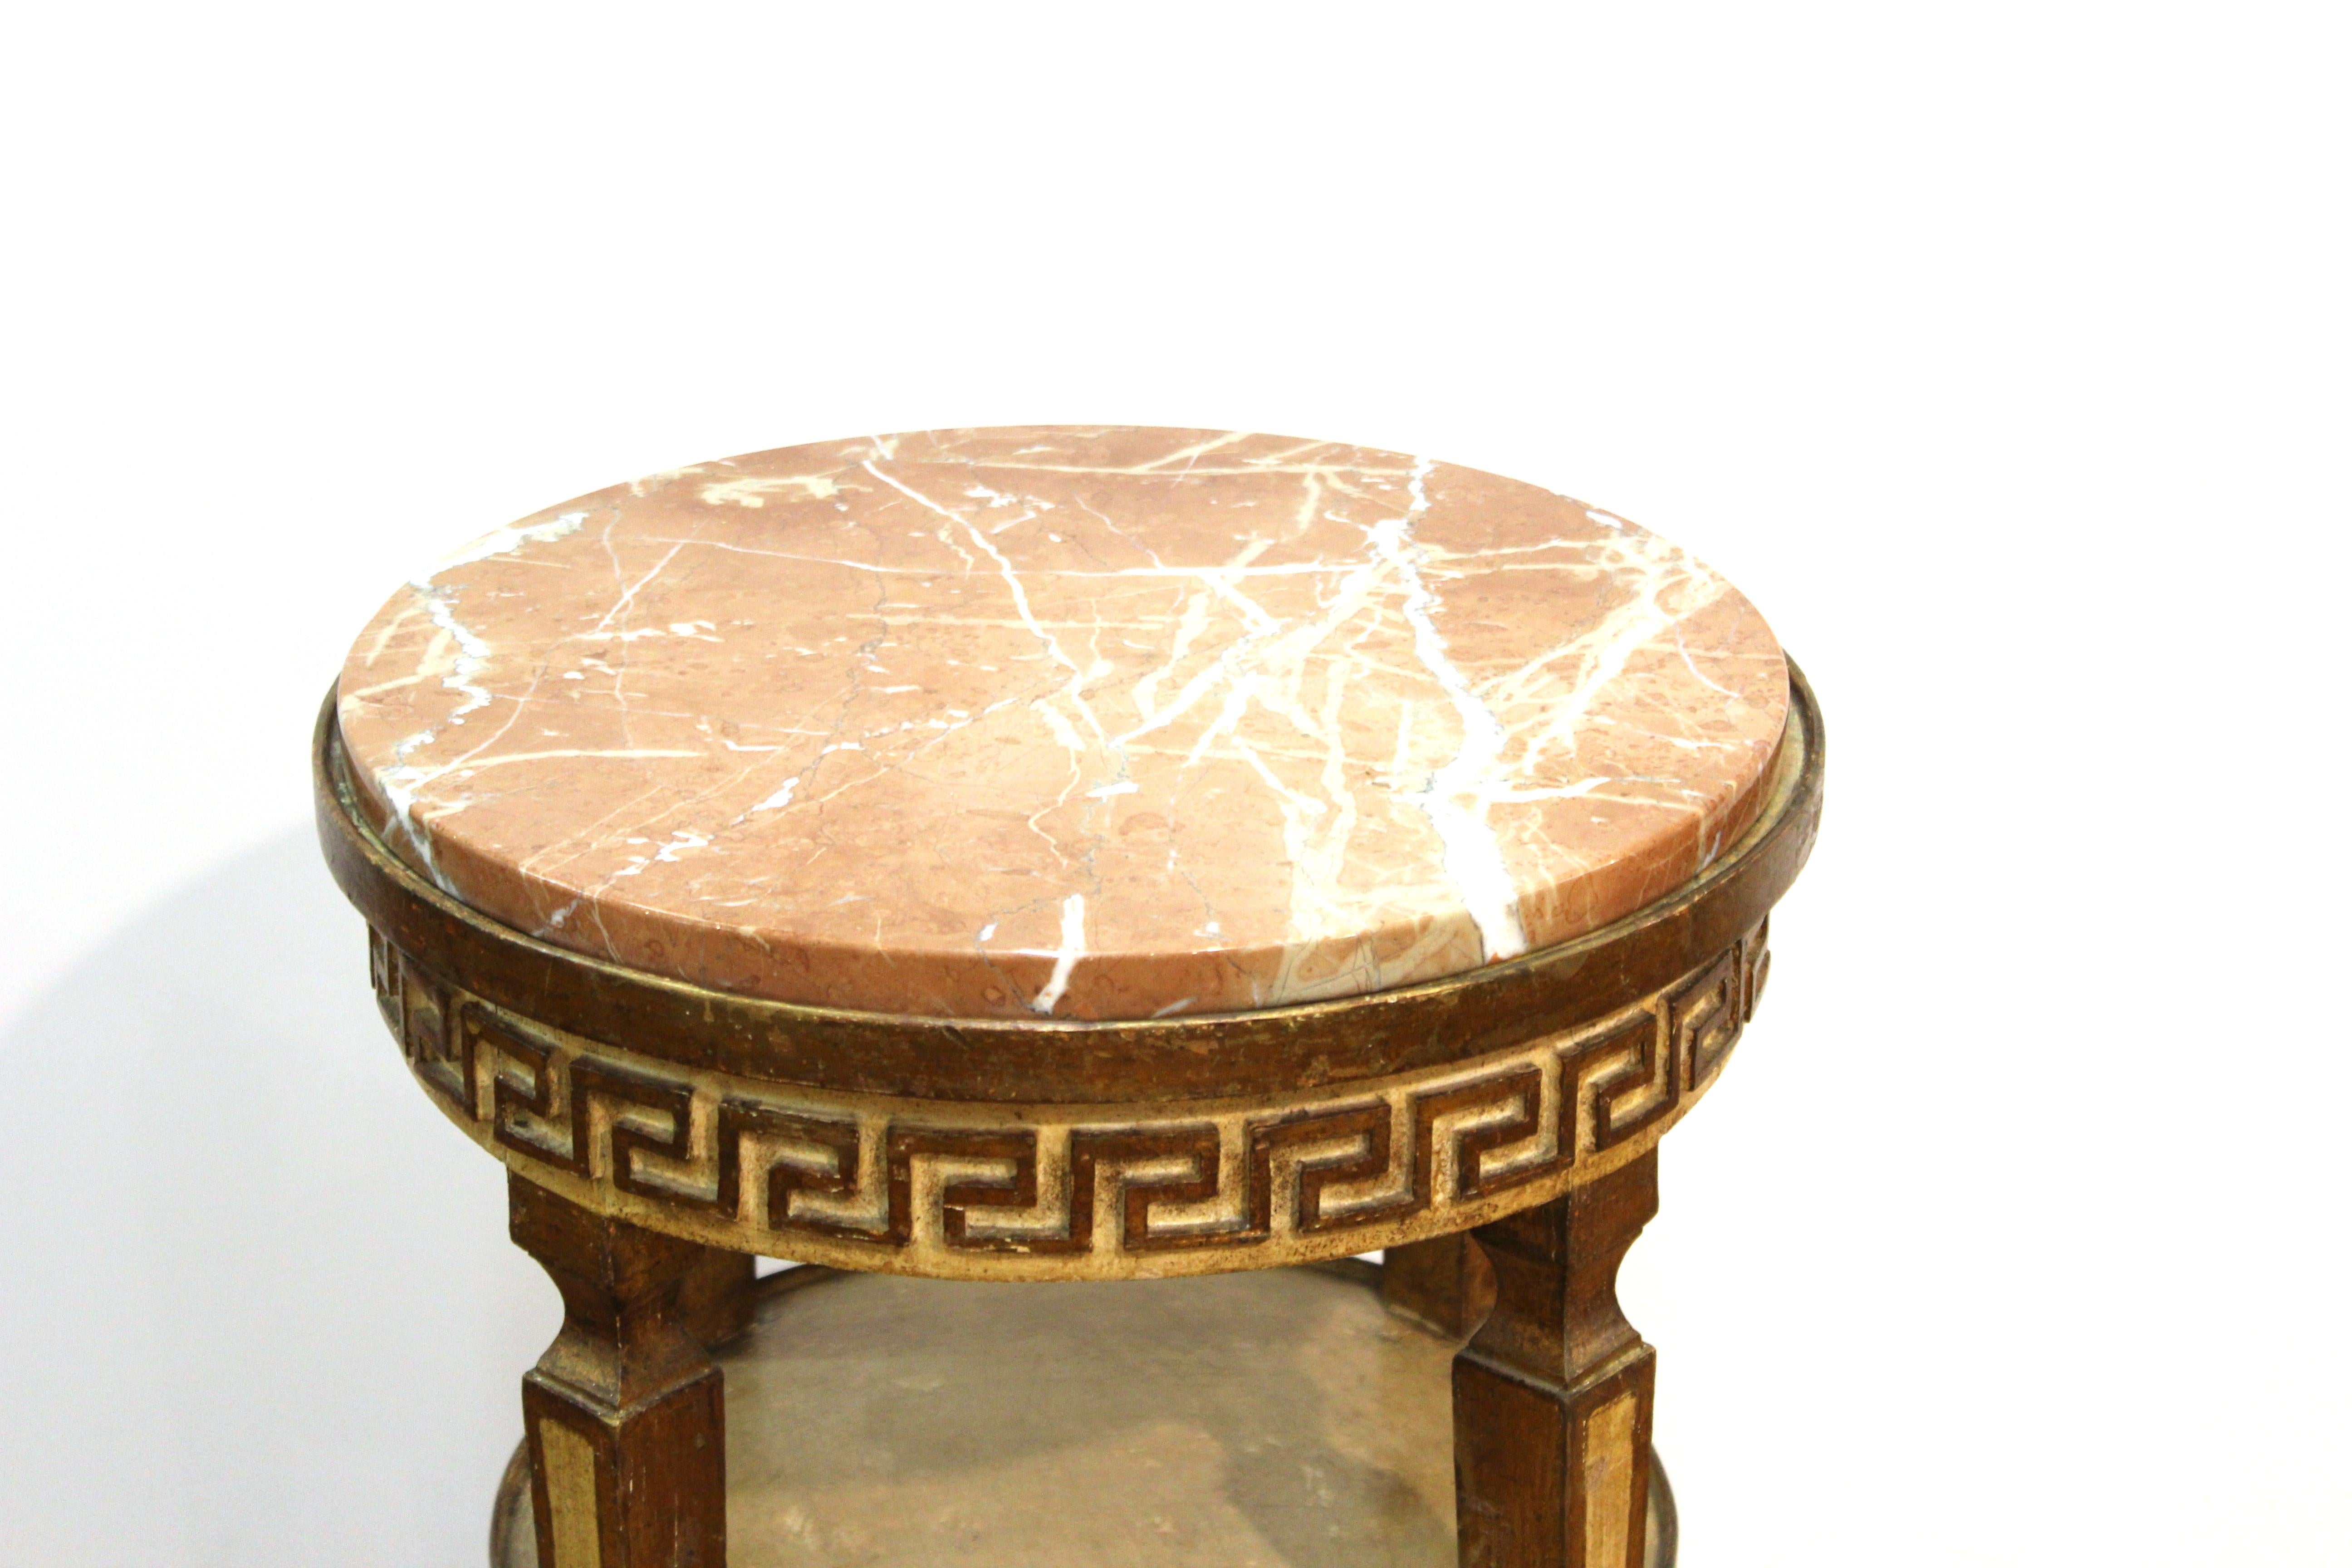 Hollywood Regency neoclassical Revival style side table in carved wood, with Grecian border and round brown veined marble top. In great vintage condition with age-appropriate wear.